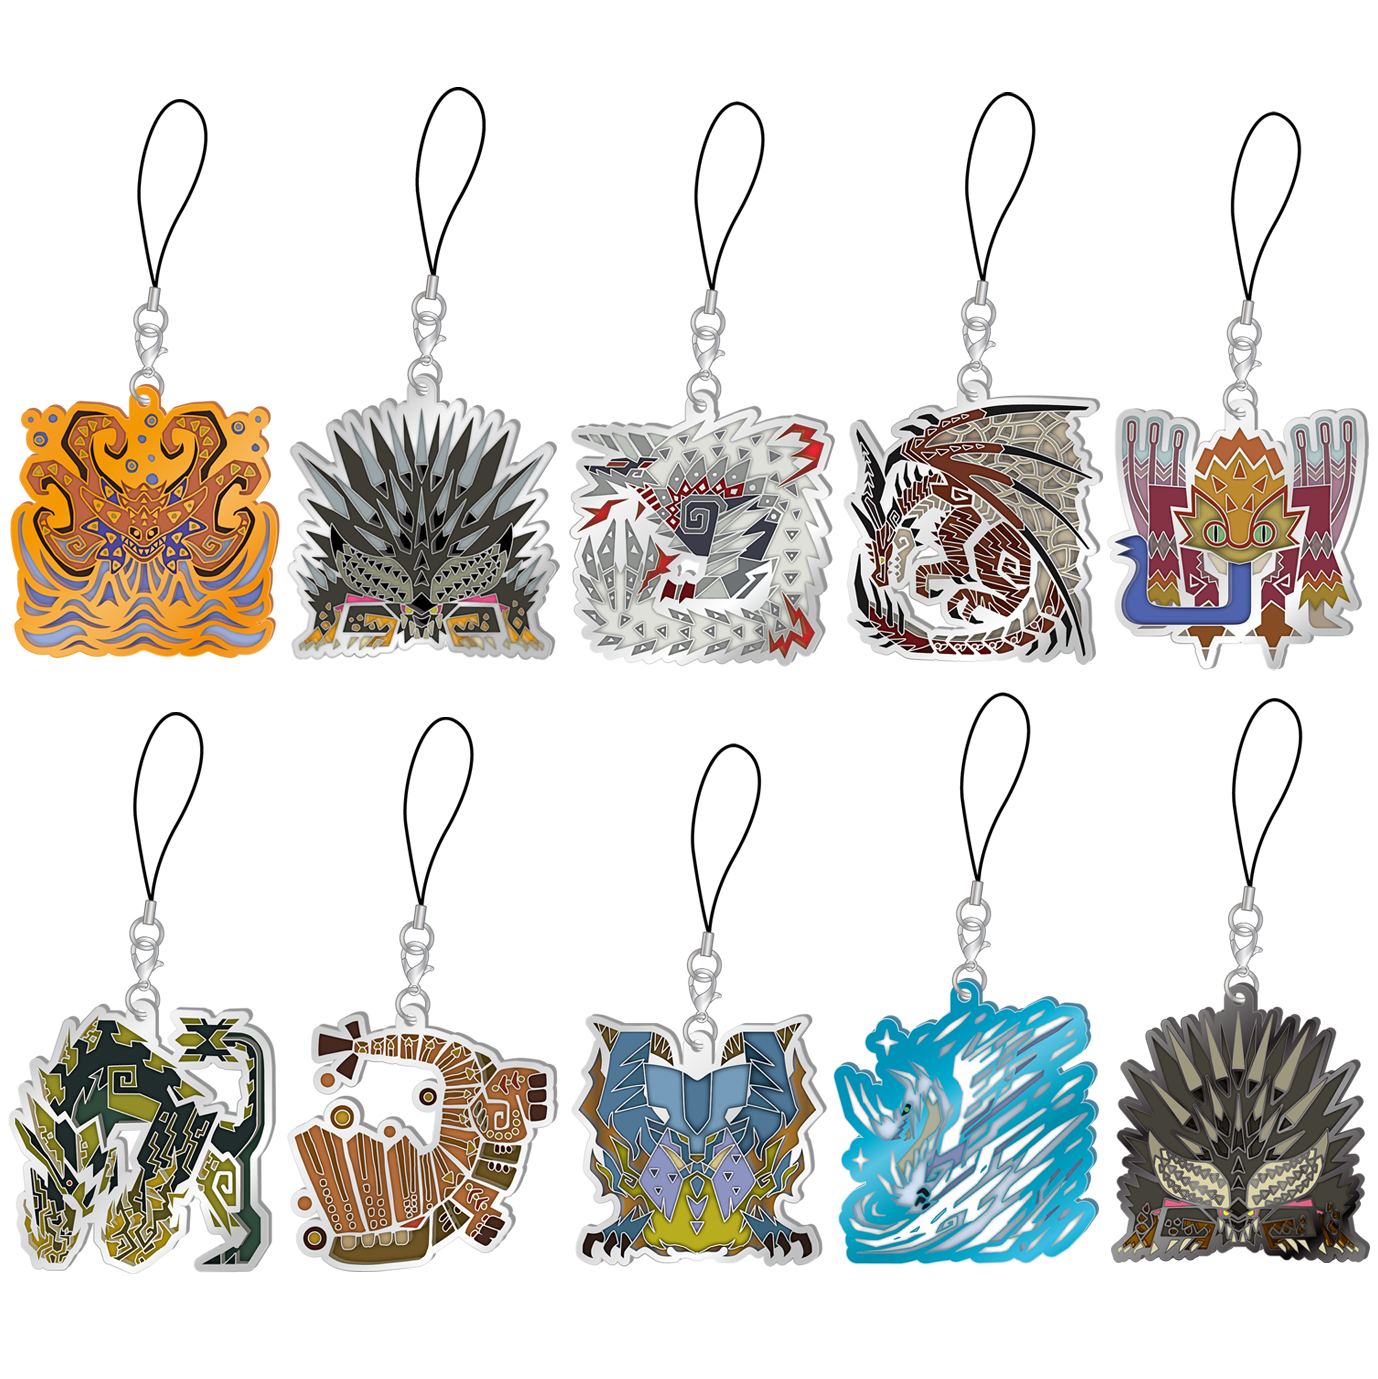 MONSTER HUNTER WORLD: ICEBORNE MONSTER ICON STAINED GLASS TYPE MASCOT COLLECTION VOL. 4 (SET OF 10 PIECES) Capcom